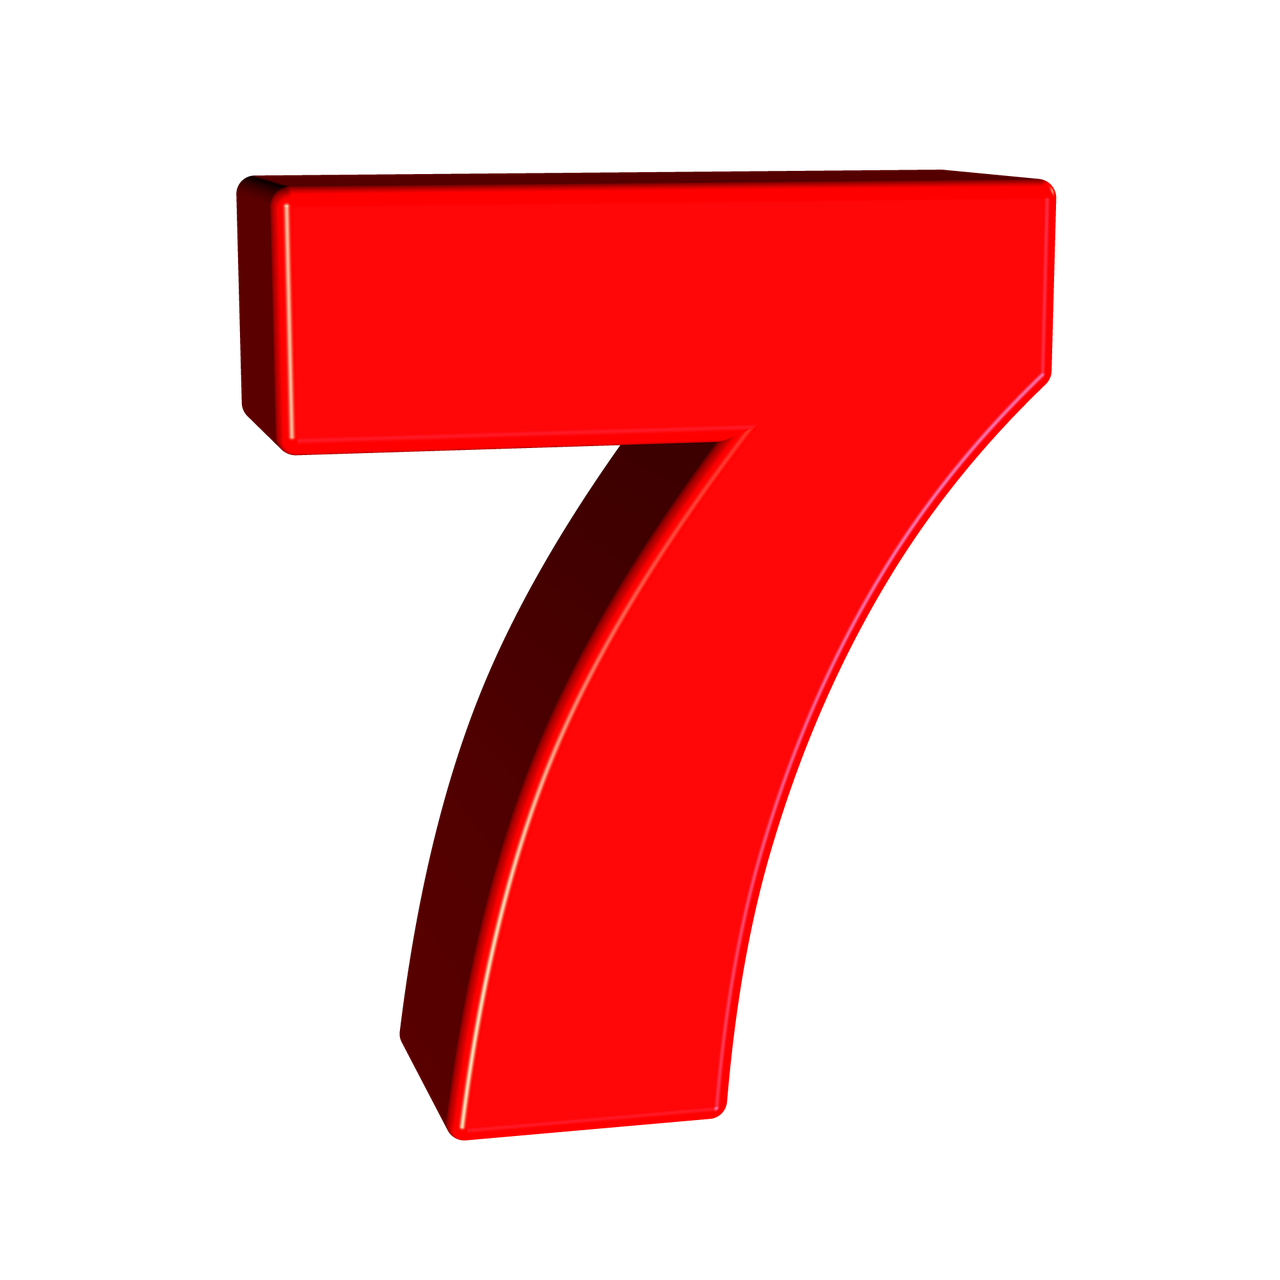 7 Number PNG Clipart